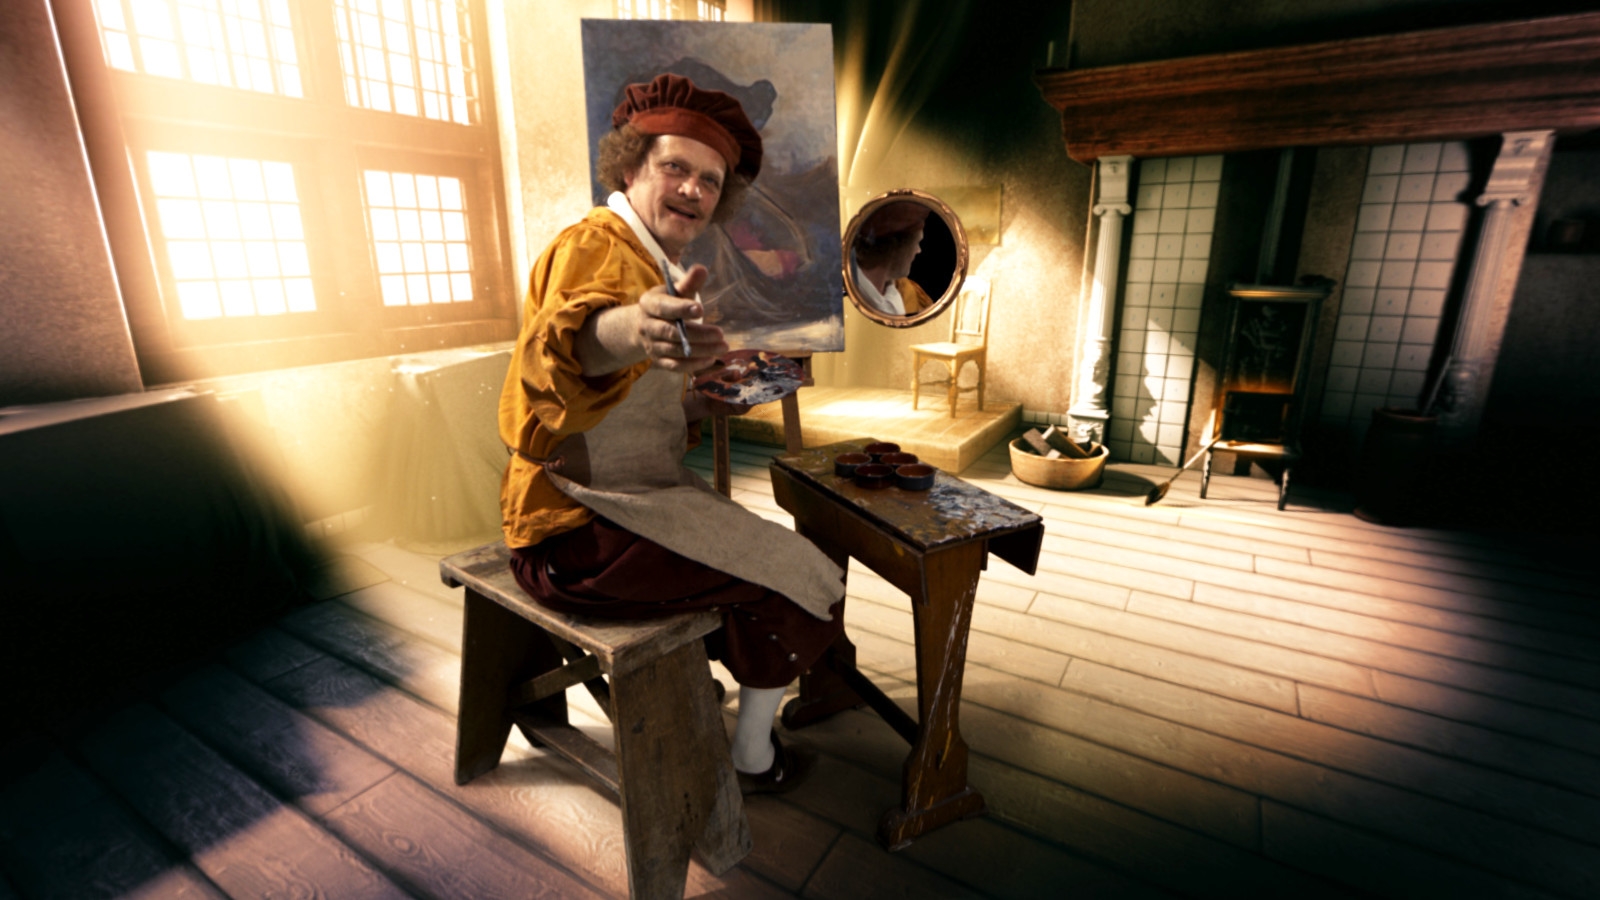 Meet Rembrandt in this Samsung Gear VR experience | DeviceDaily.com